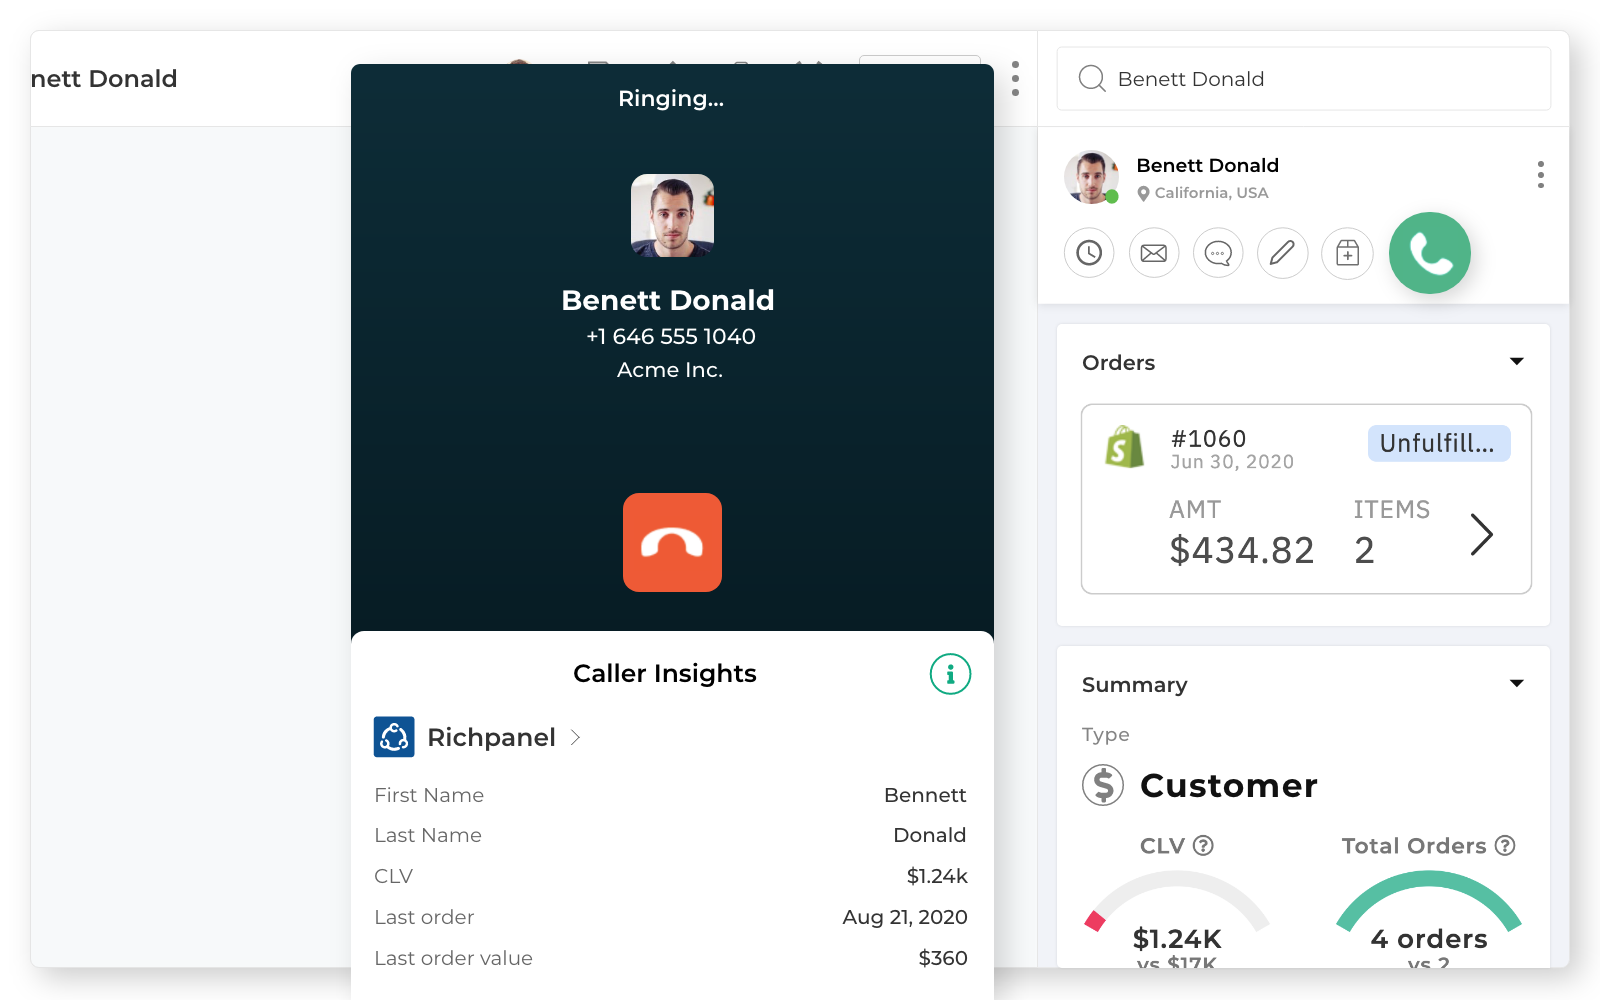 Make & receive calls directly in Richpanel.